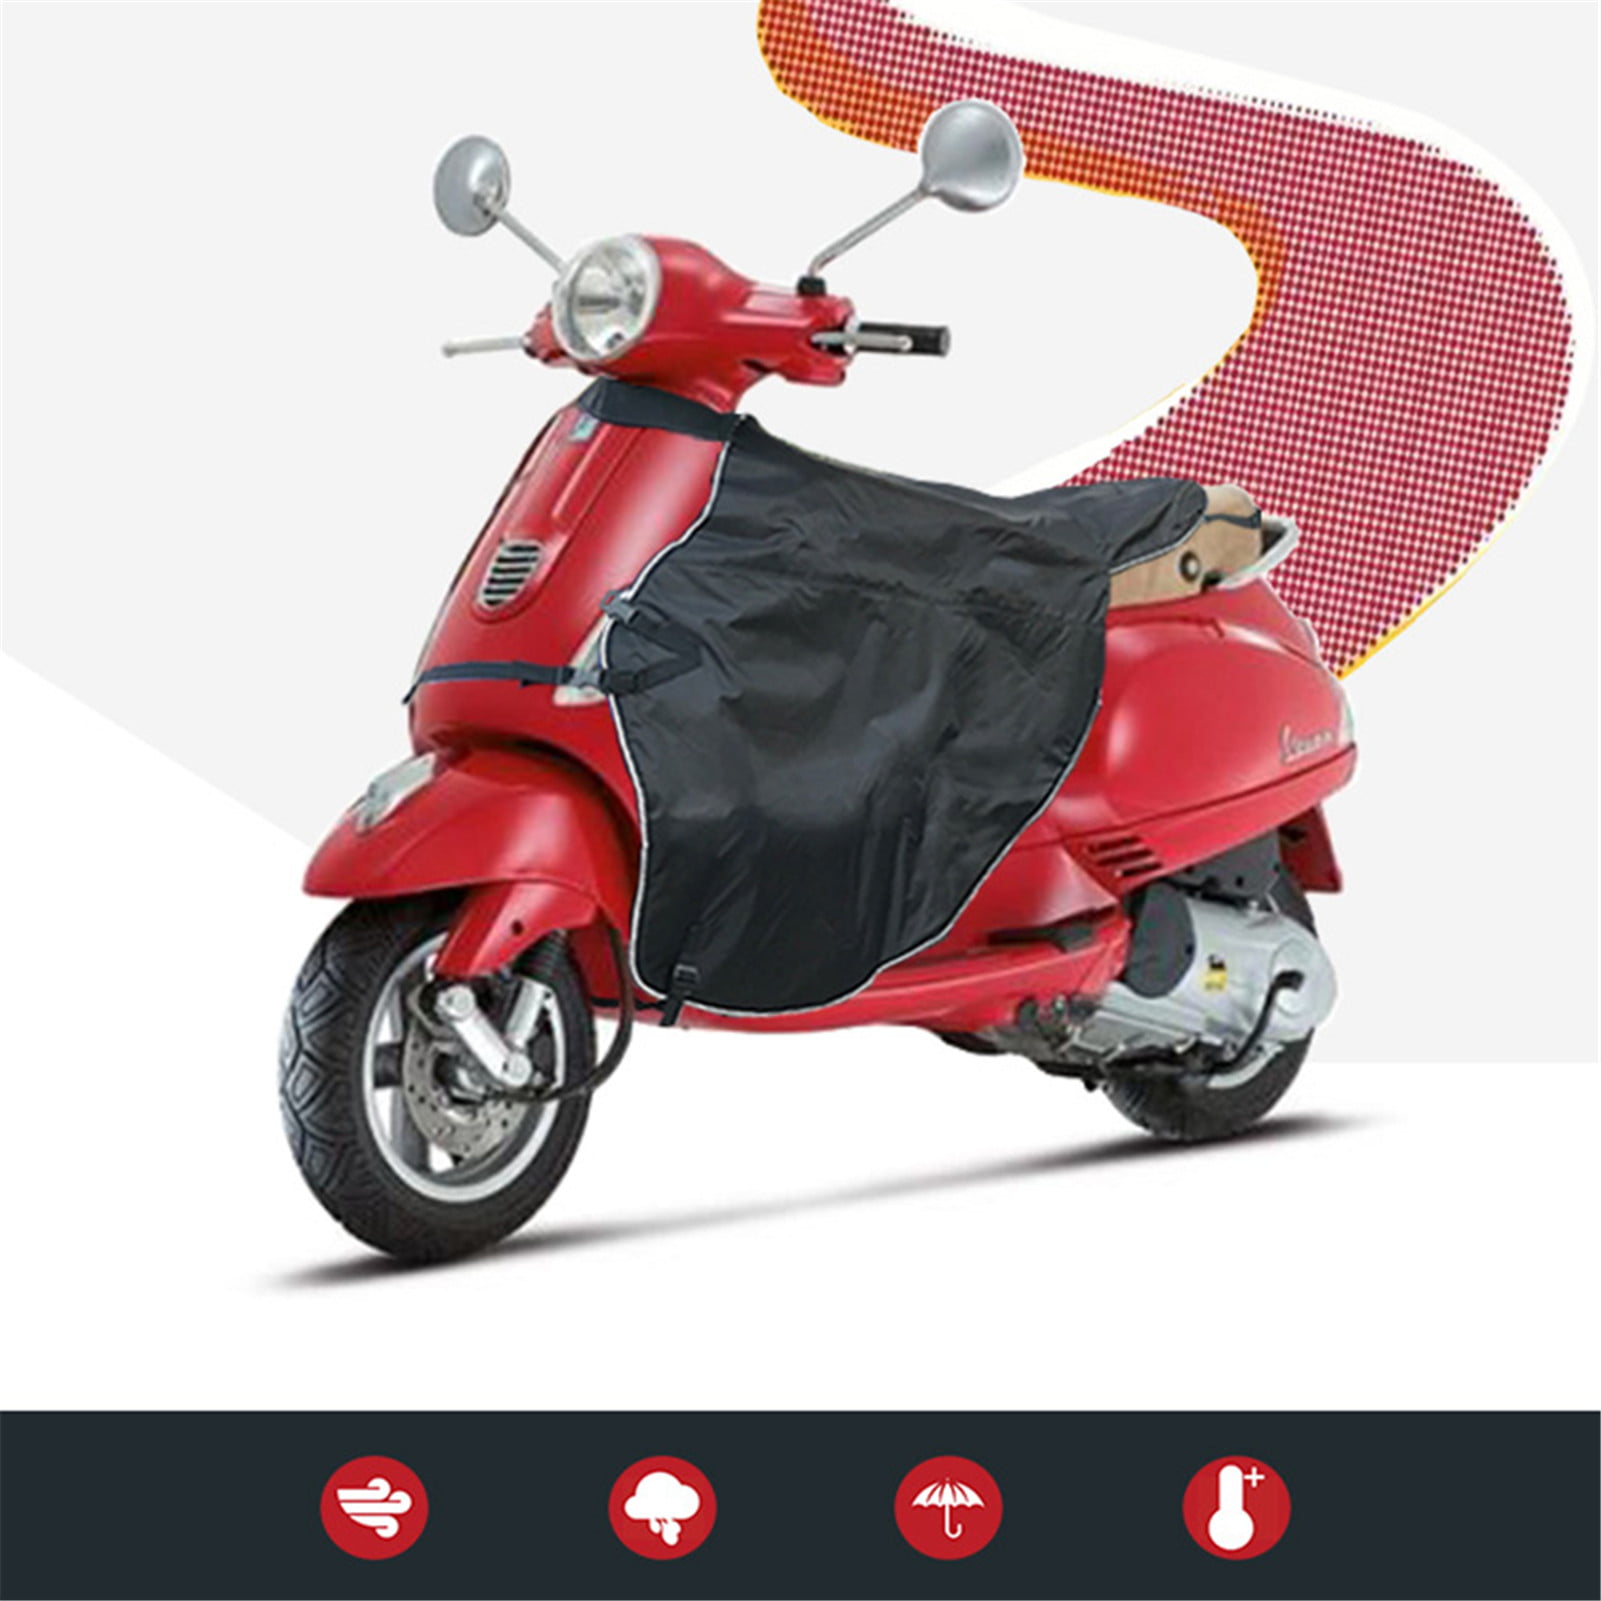 Easy-topbuy Scooter Windproof Leg Lap Apron Cover Waterproof Wear-resistant Warm Leg Protector For Scooter/Electric Car 